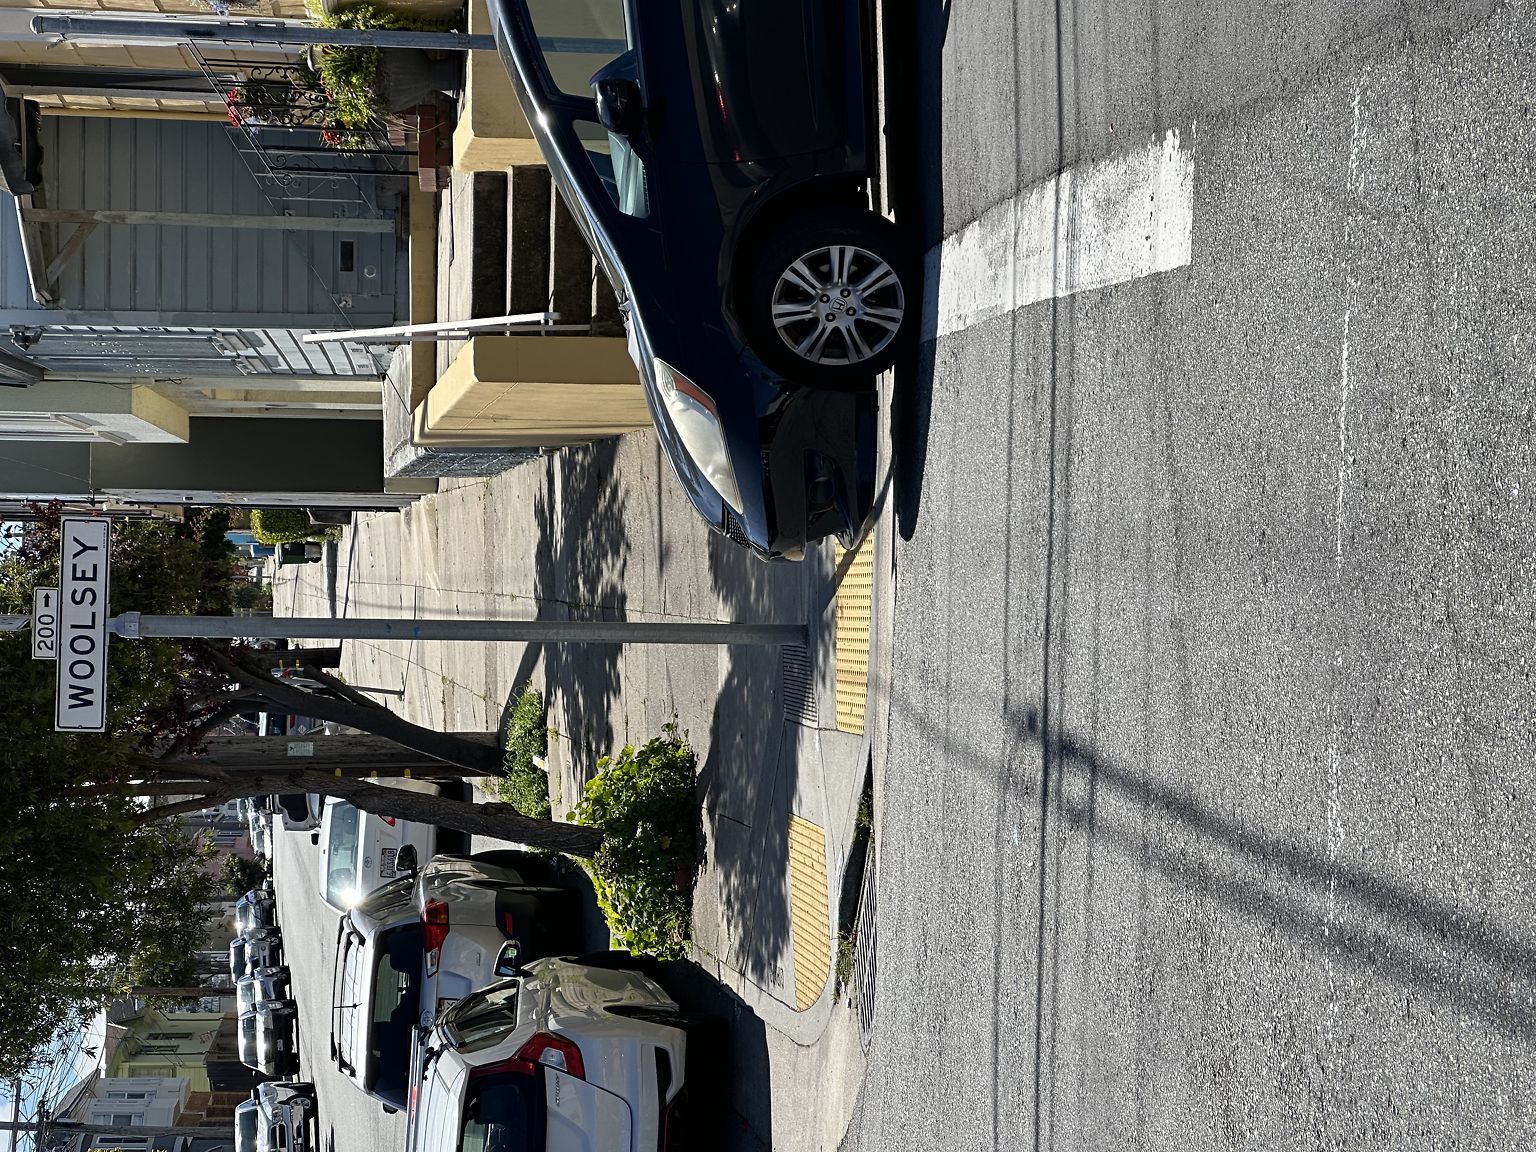 Photo of car in the street with license plate 7FQD813 in California